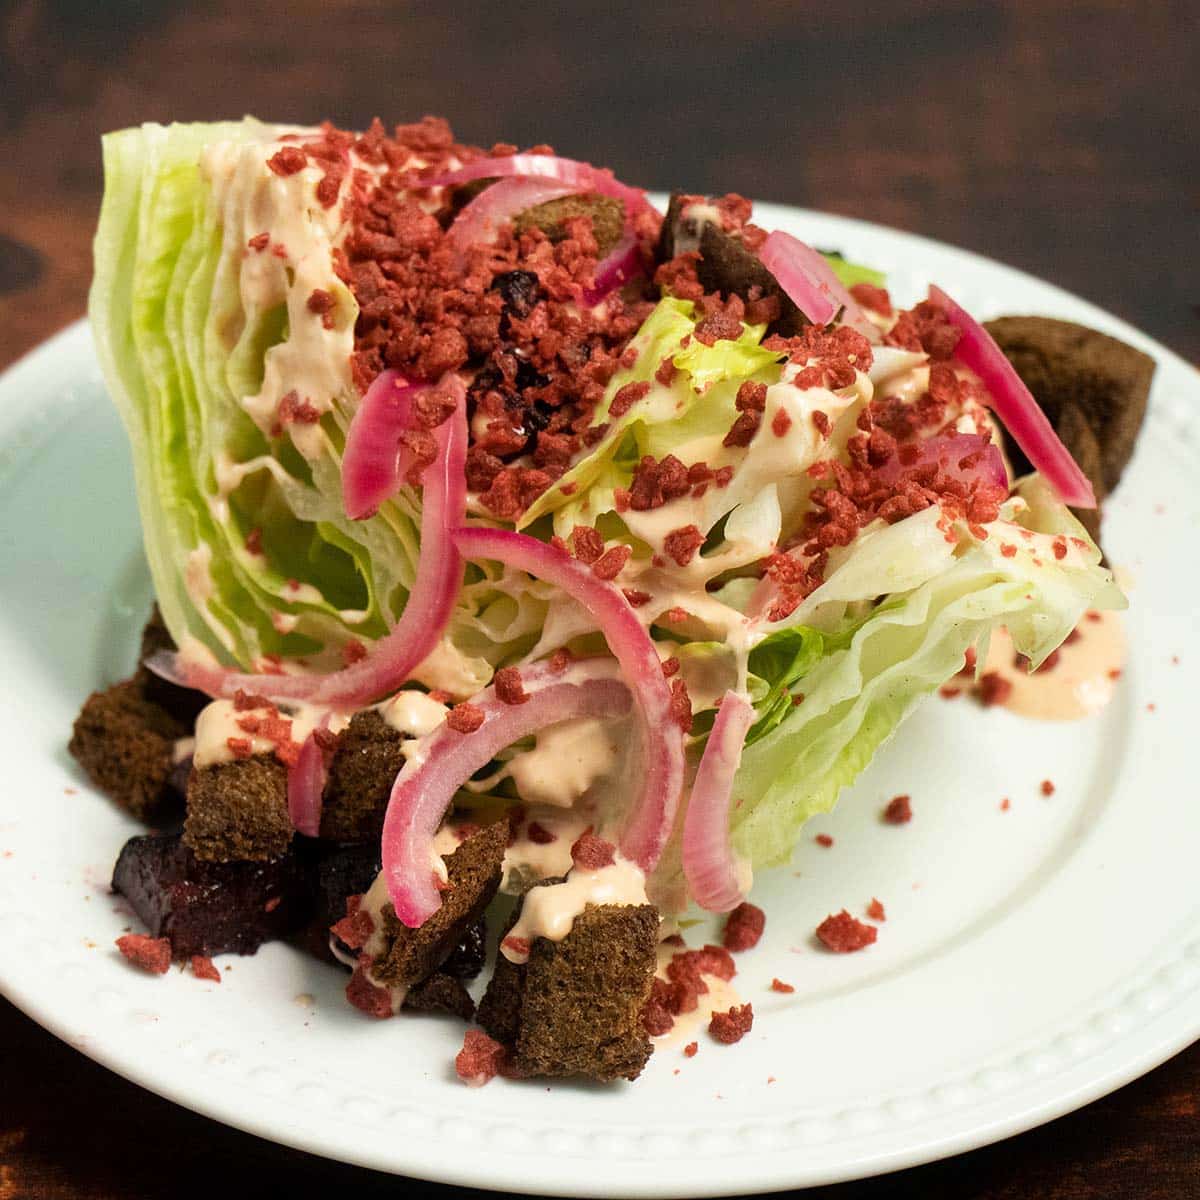 vegan wedge salad with dark croutons, pickled onions, bacon, and creamy dressing on a white plate